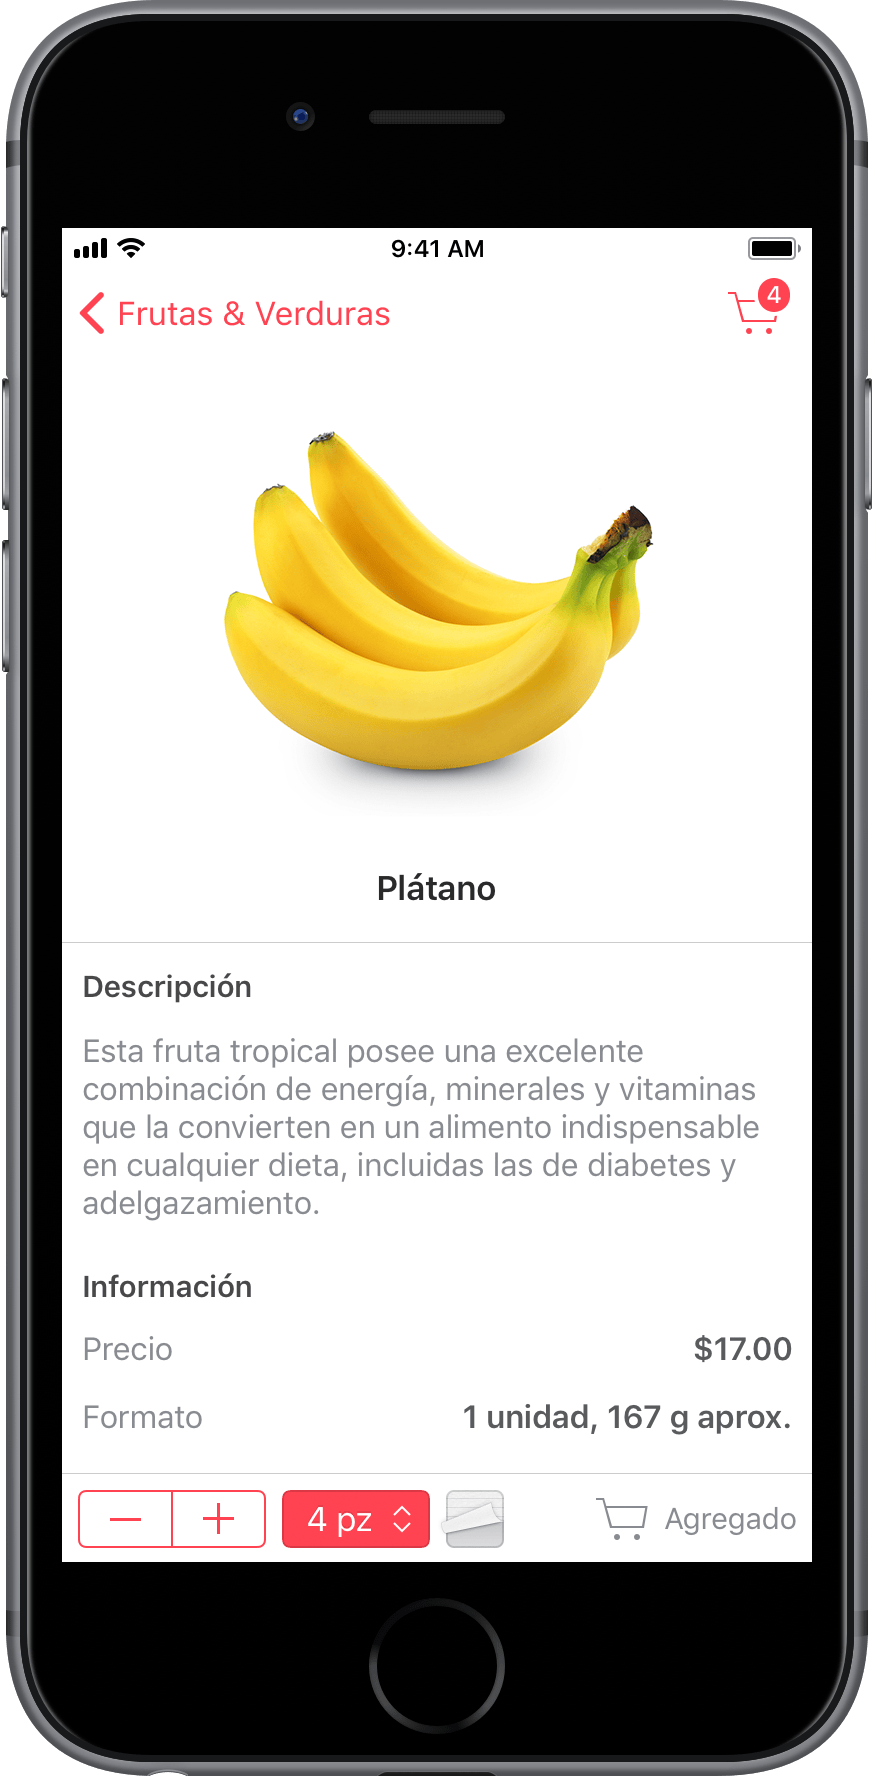 An iPhone displaying the Cornershop app, showing a pack of bananas. The user interface has lots of white space and buttons are tinted in a shade of red. A toolbar shows that 4 bananas were added into the Cart.